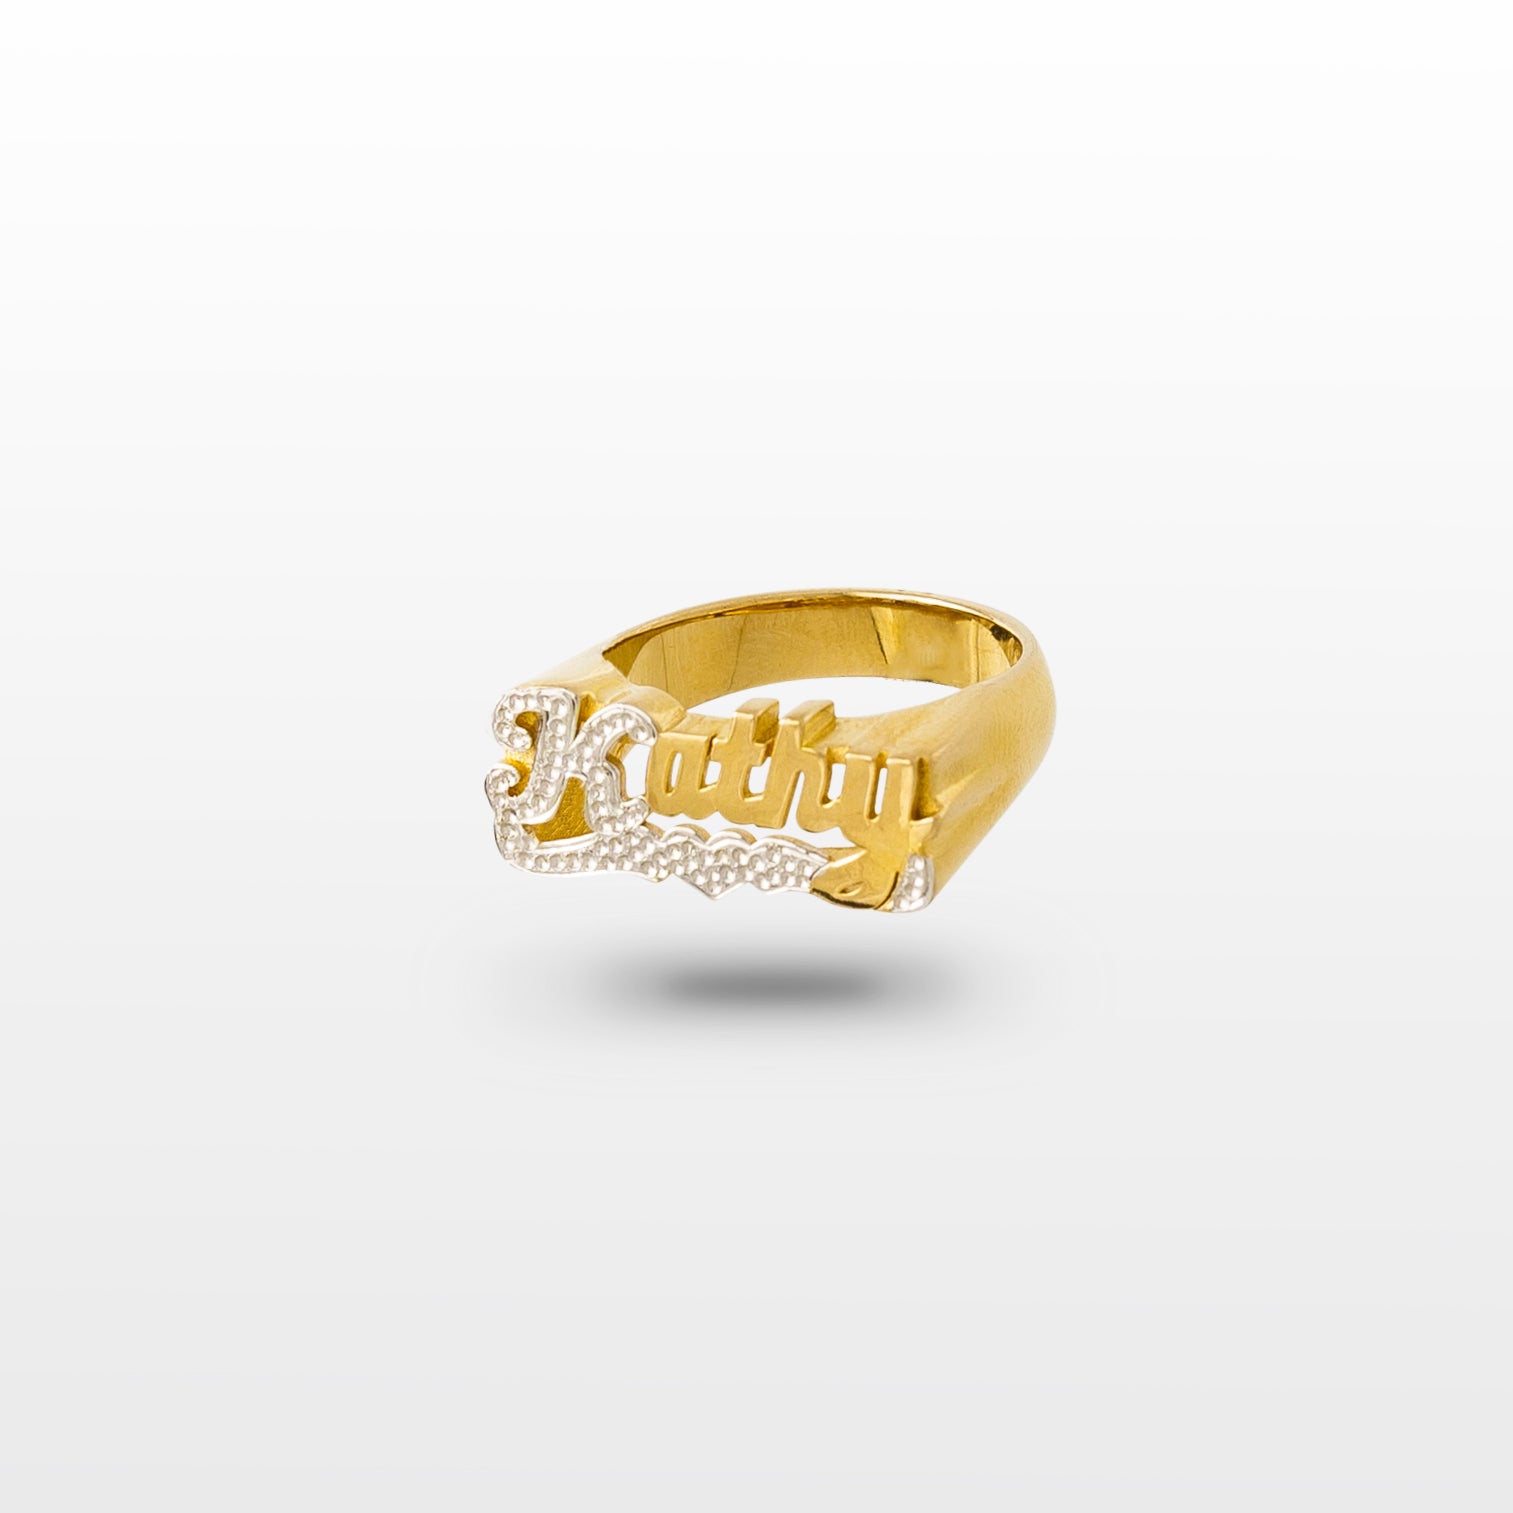 Rectangular Bar Name Ring in 18k Gold Plating over 925 Sterling Silver |  JOYAMO - Personalized Jewelry